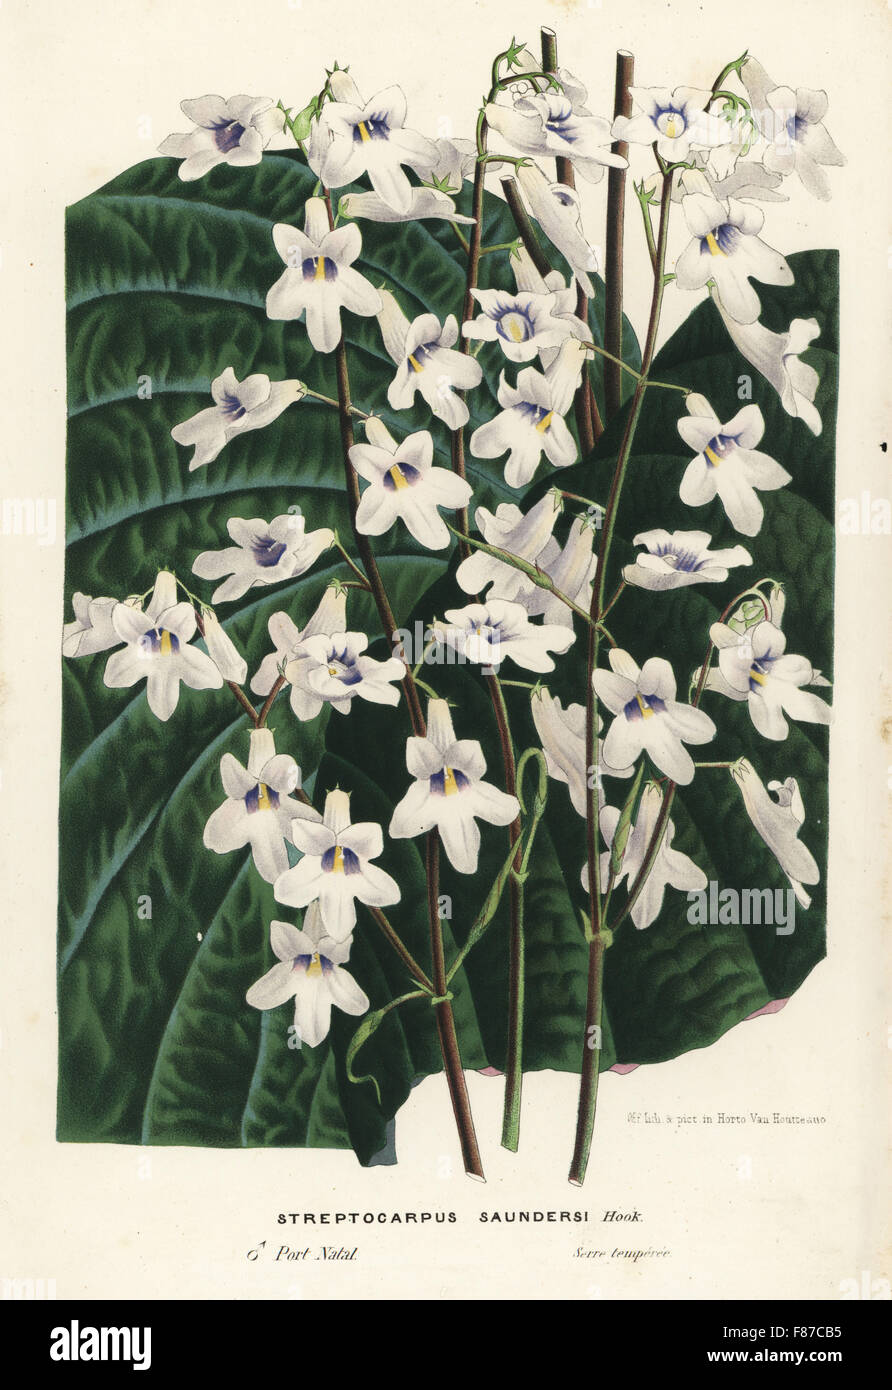 Cape primrose, Streptocarpus saundersii. Handcoloured lithograph from Louis van Houtte and Charles Lemaire's Flowers of the Gardens and Hothouses of Europe, Flore des Serres et des Jardins de l'Europe, Ghent, Belgium, 1867-1868. Stock Photo